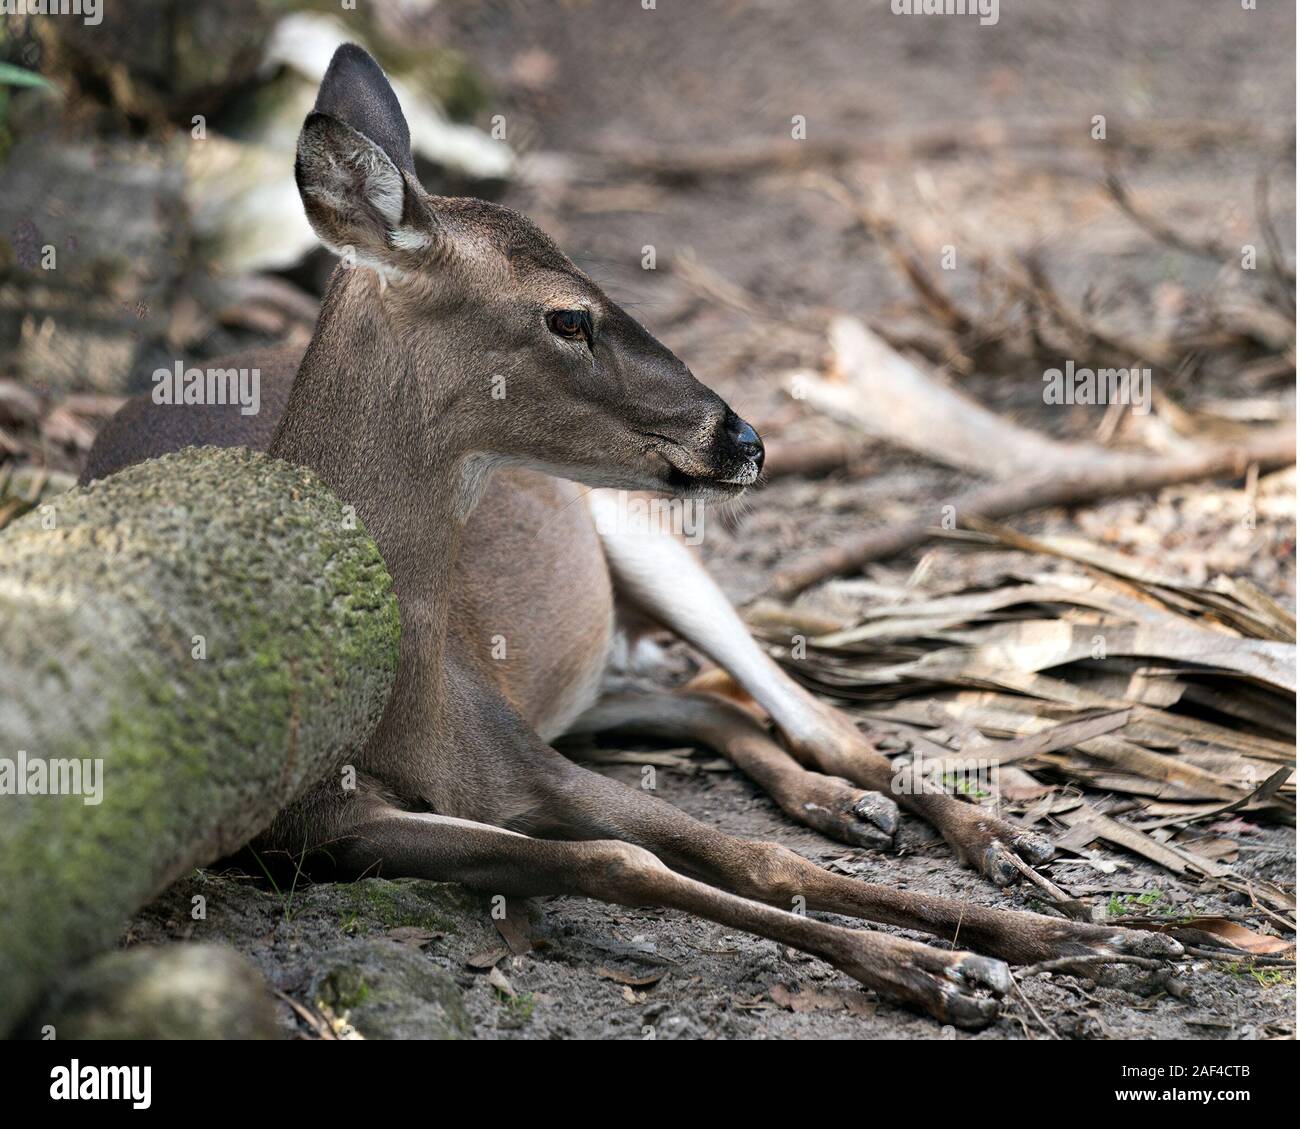 Deer (Florida Key Deer) animal close-up profile view looking at the right side resting displaying its head, ears, eyes, nose, legs with a foliage back Stock Photo